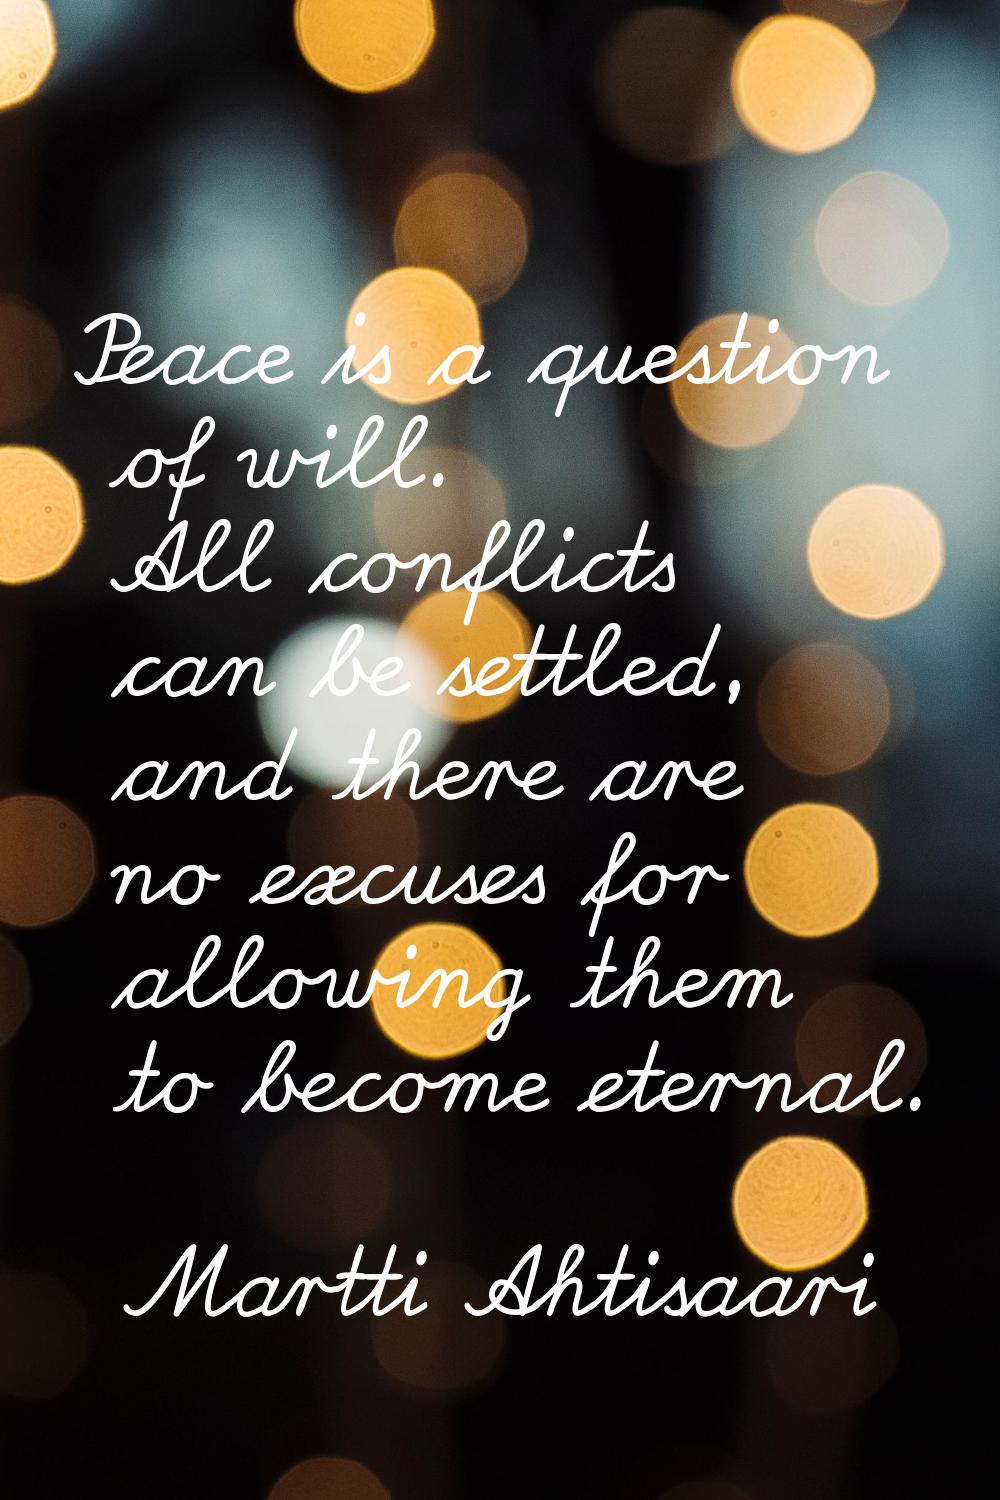 Peace is a question of will. All conflicts can be settled, and there are no excuses for allowing th